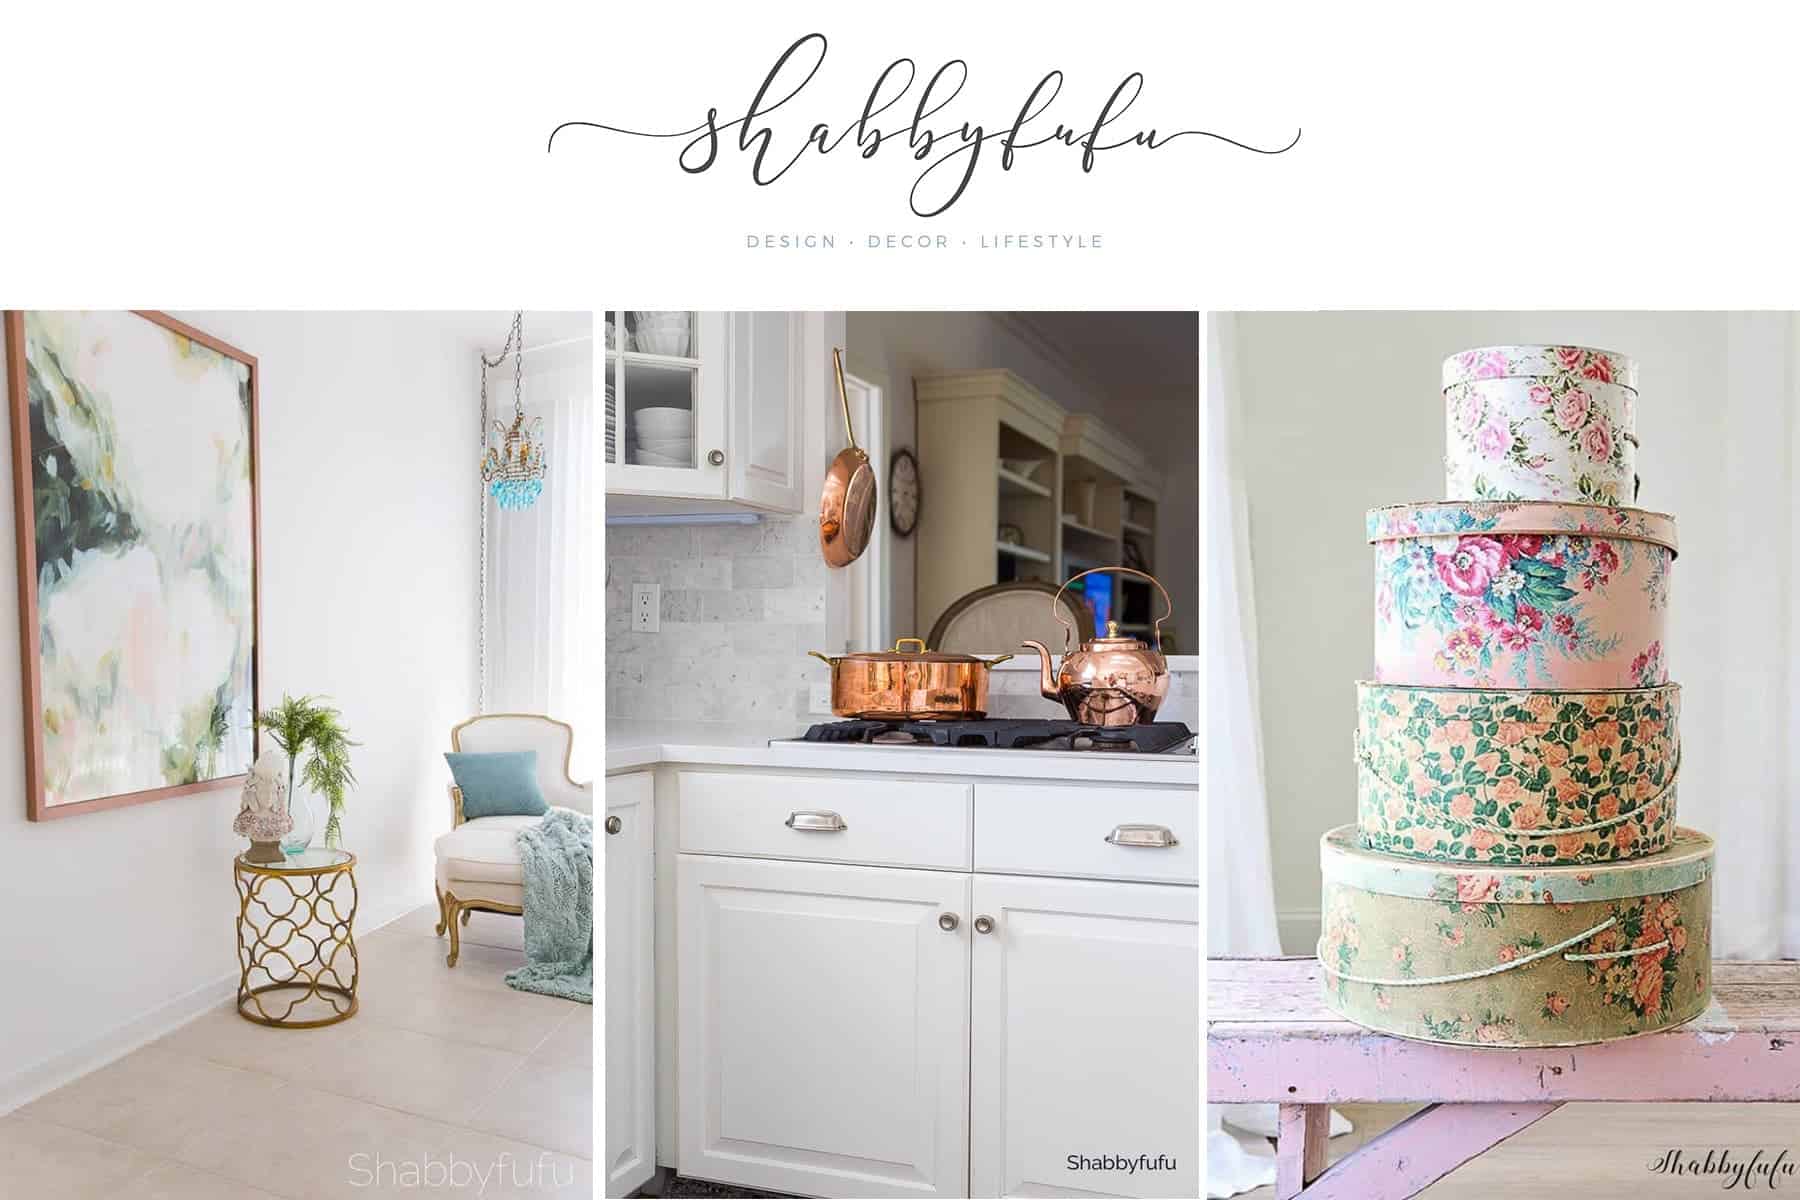 The Style Showcase 91| Your Destination For Home Decor Inspiration